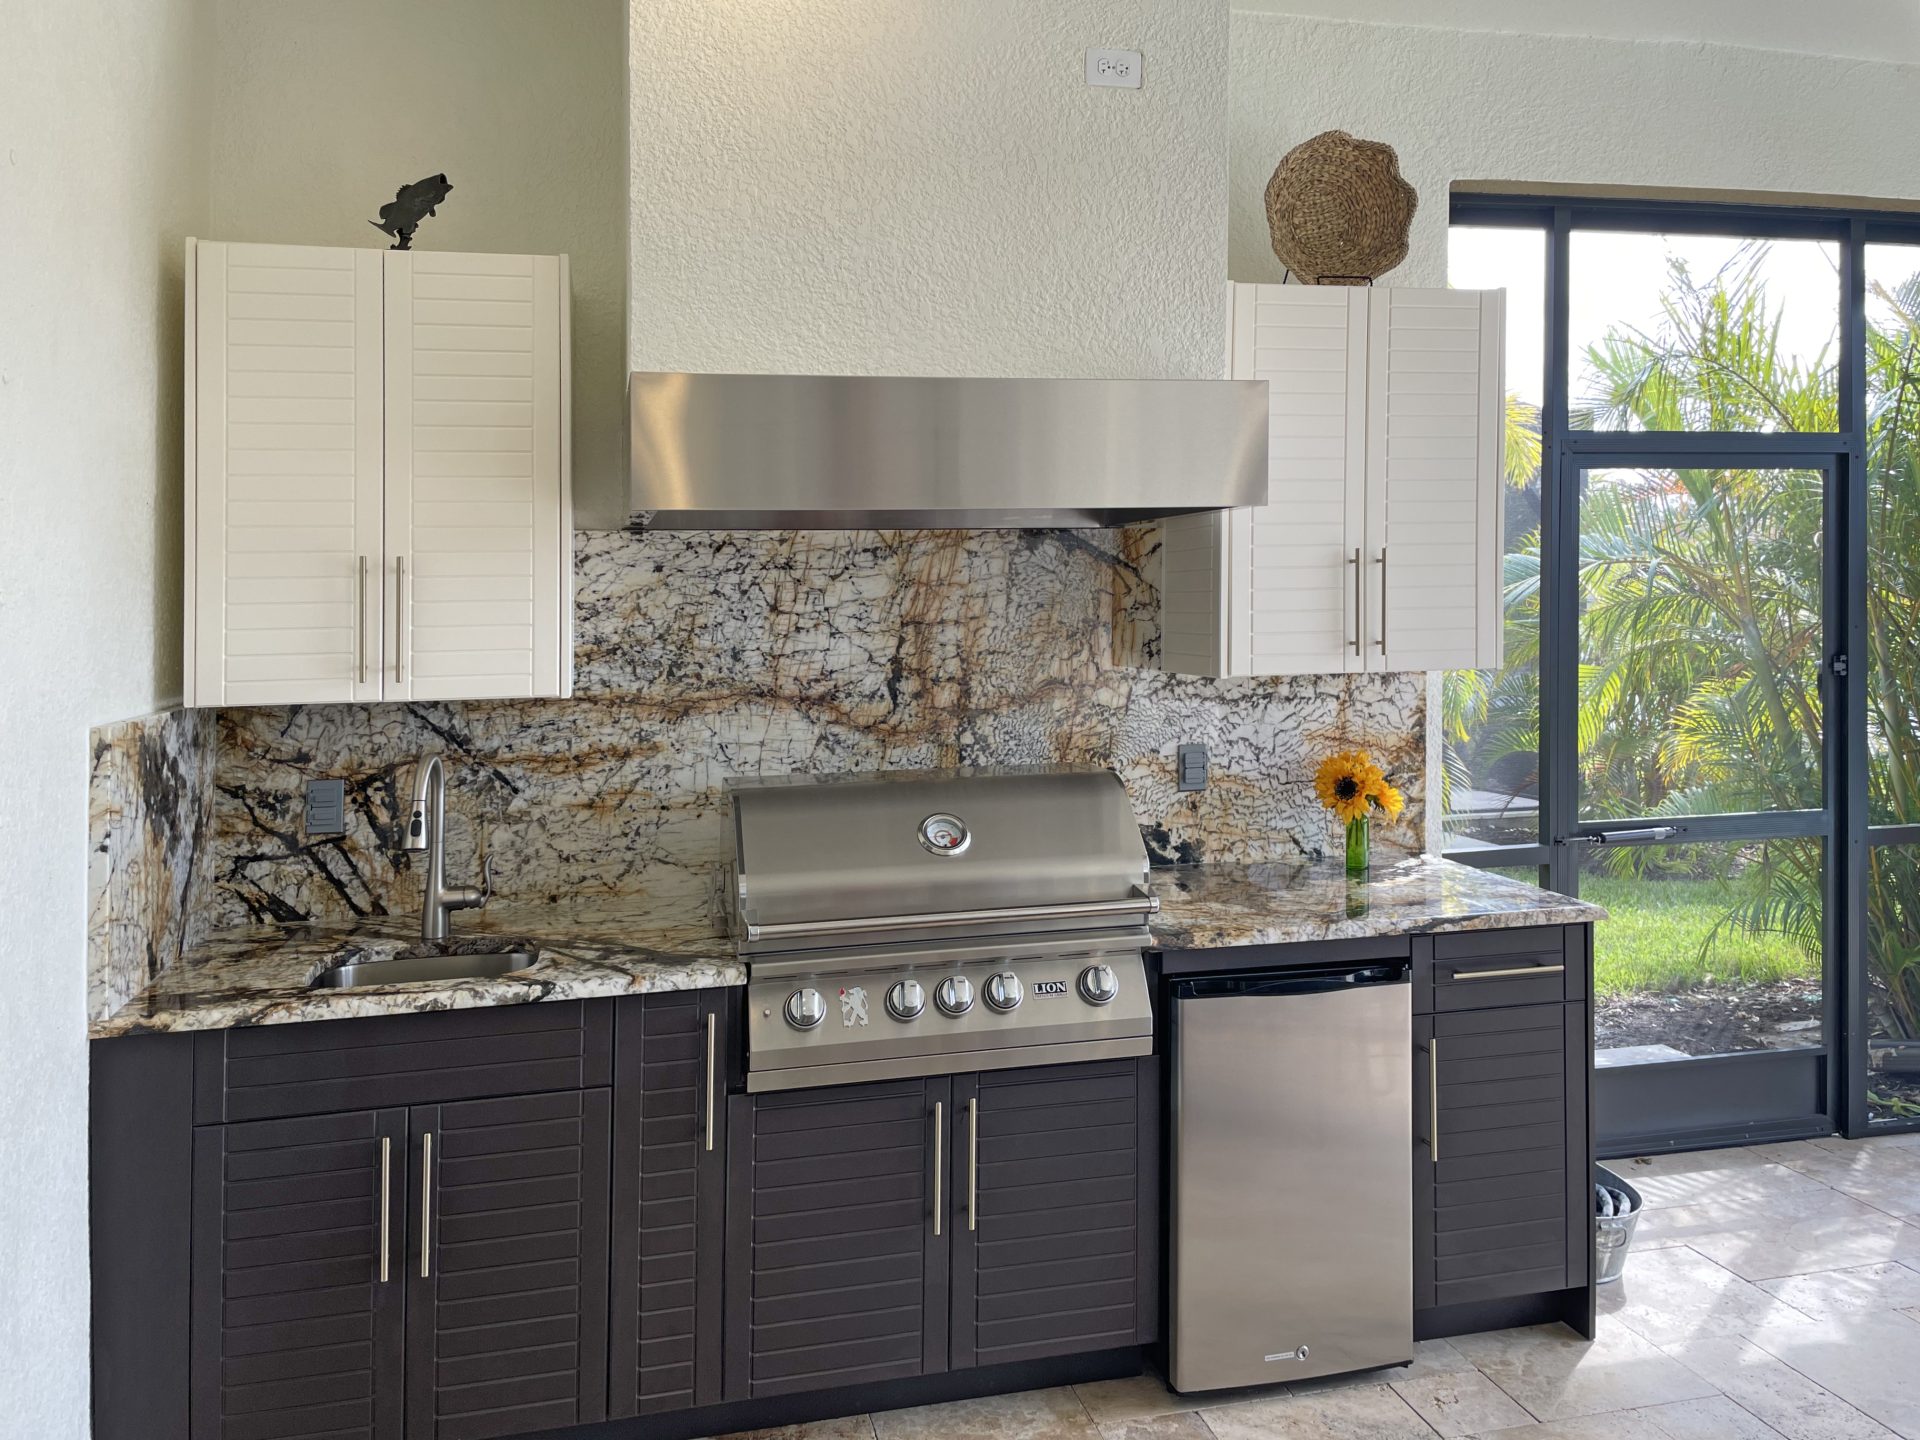 OUTDOOR KITCHEN 17. Custom outdoor kitchen in Nokomis, FL. Kitchen features seafoam and dark brown, cabana cabinets. Appliances include Lion grill, Falmec outdoor hood, stucco hood chase, Blaze stainless front refrigerator and stainless bar pulls.